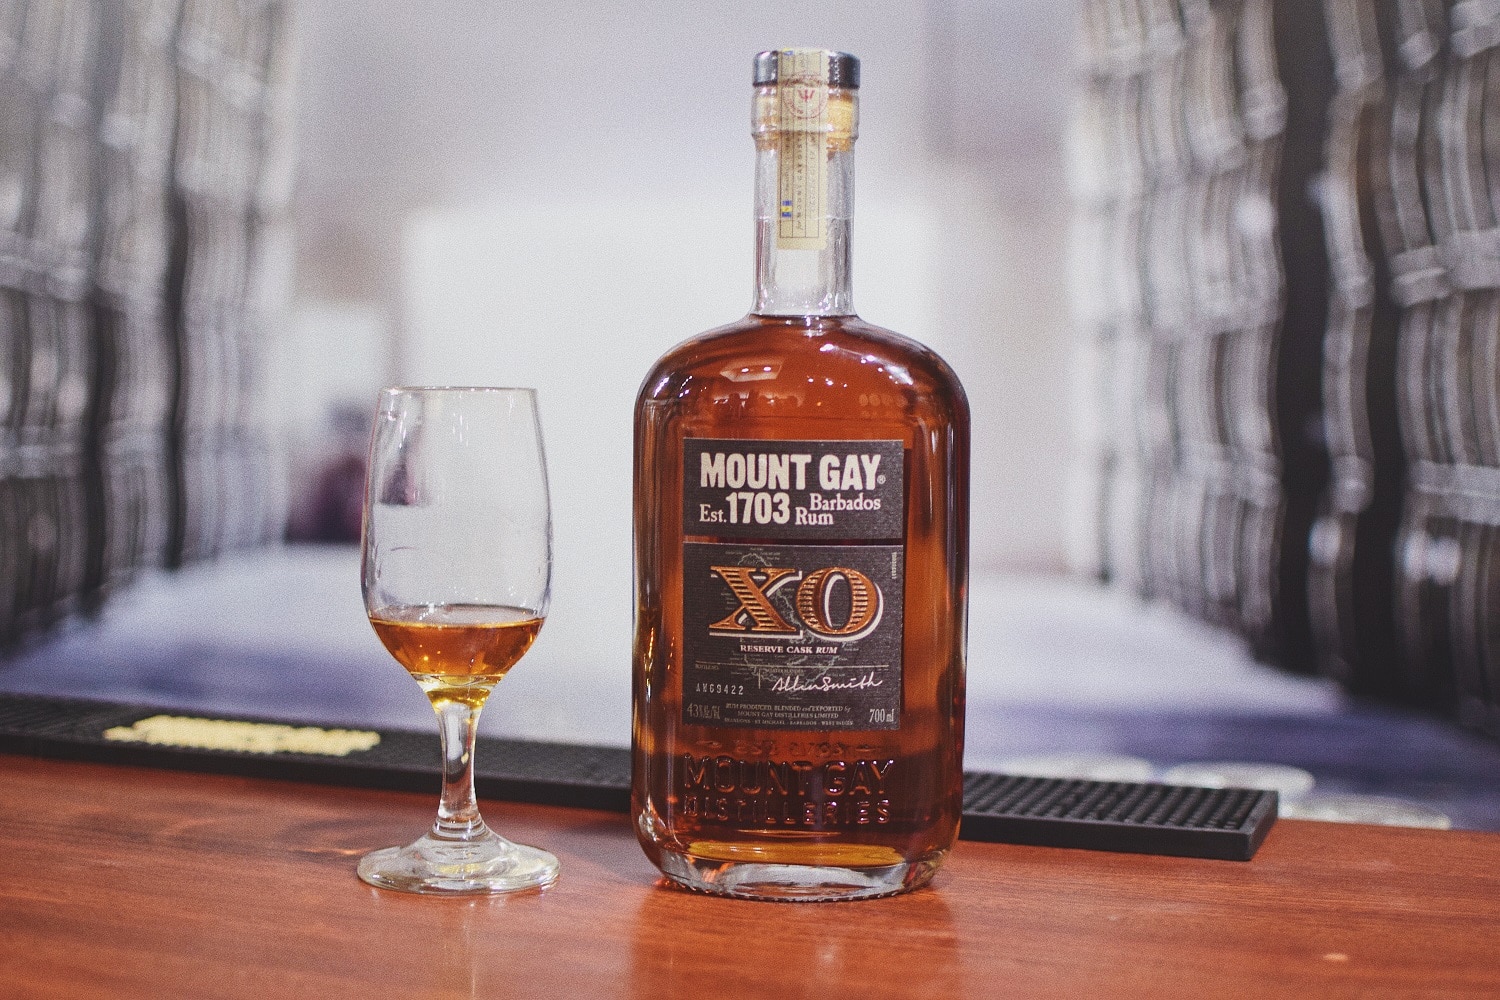 A bottle of Mount Gay XO rum and a tasting glass